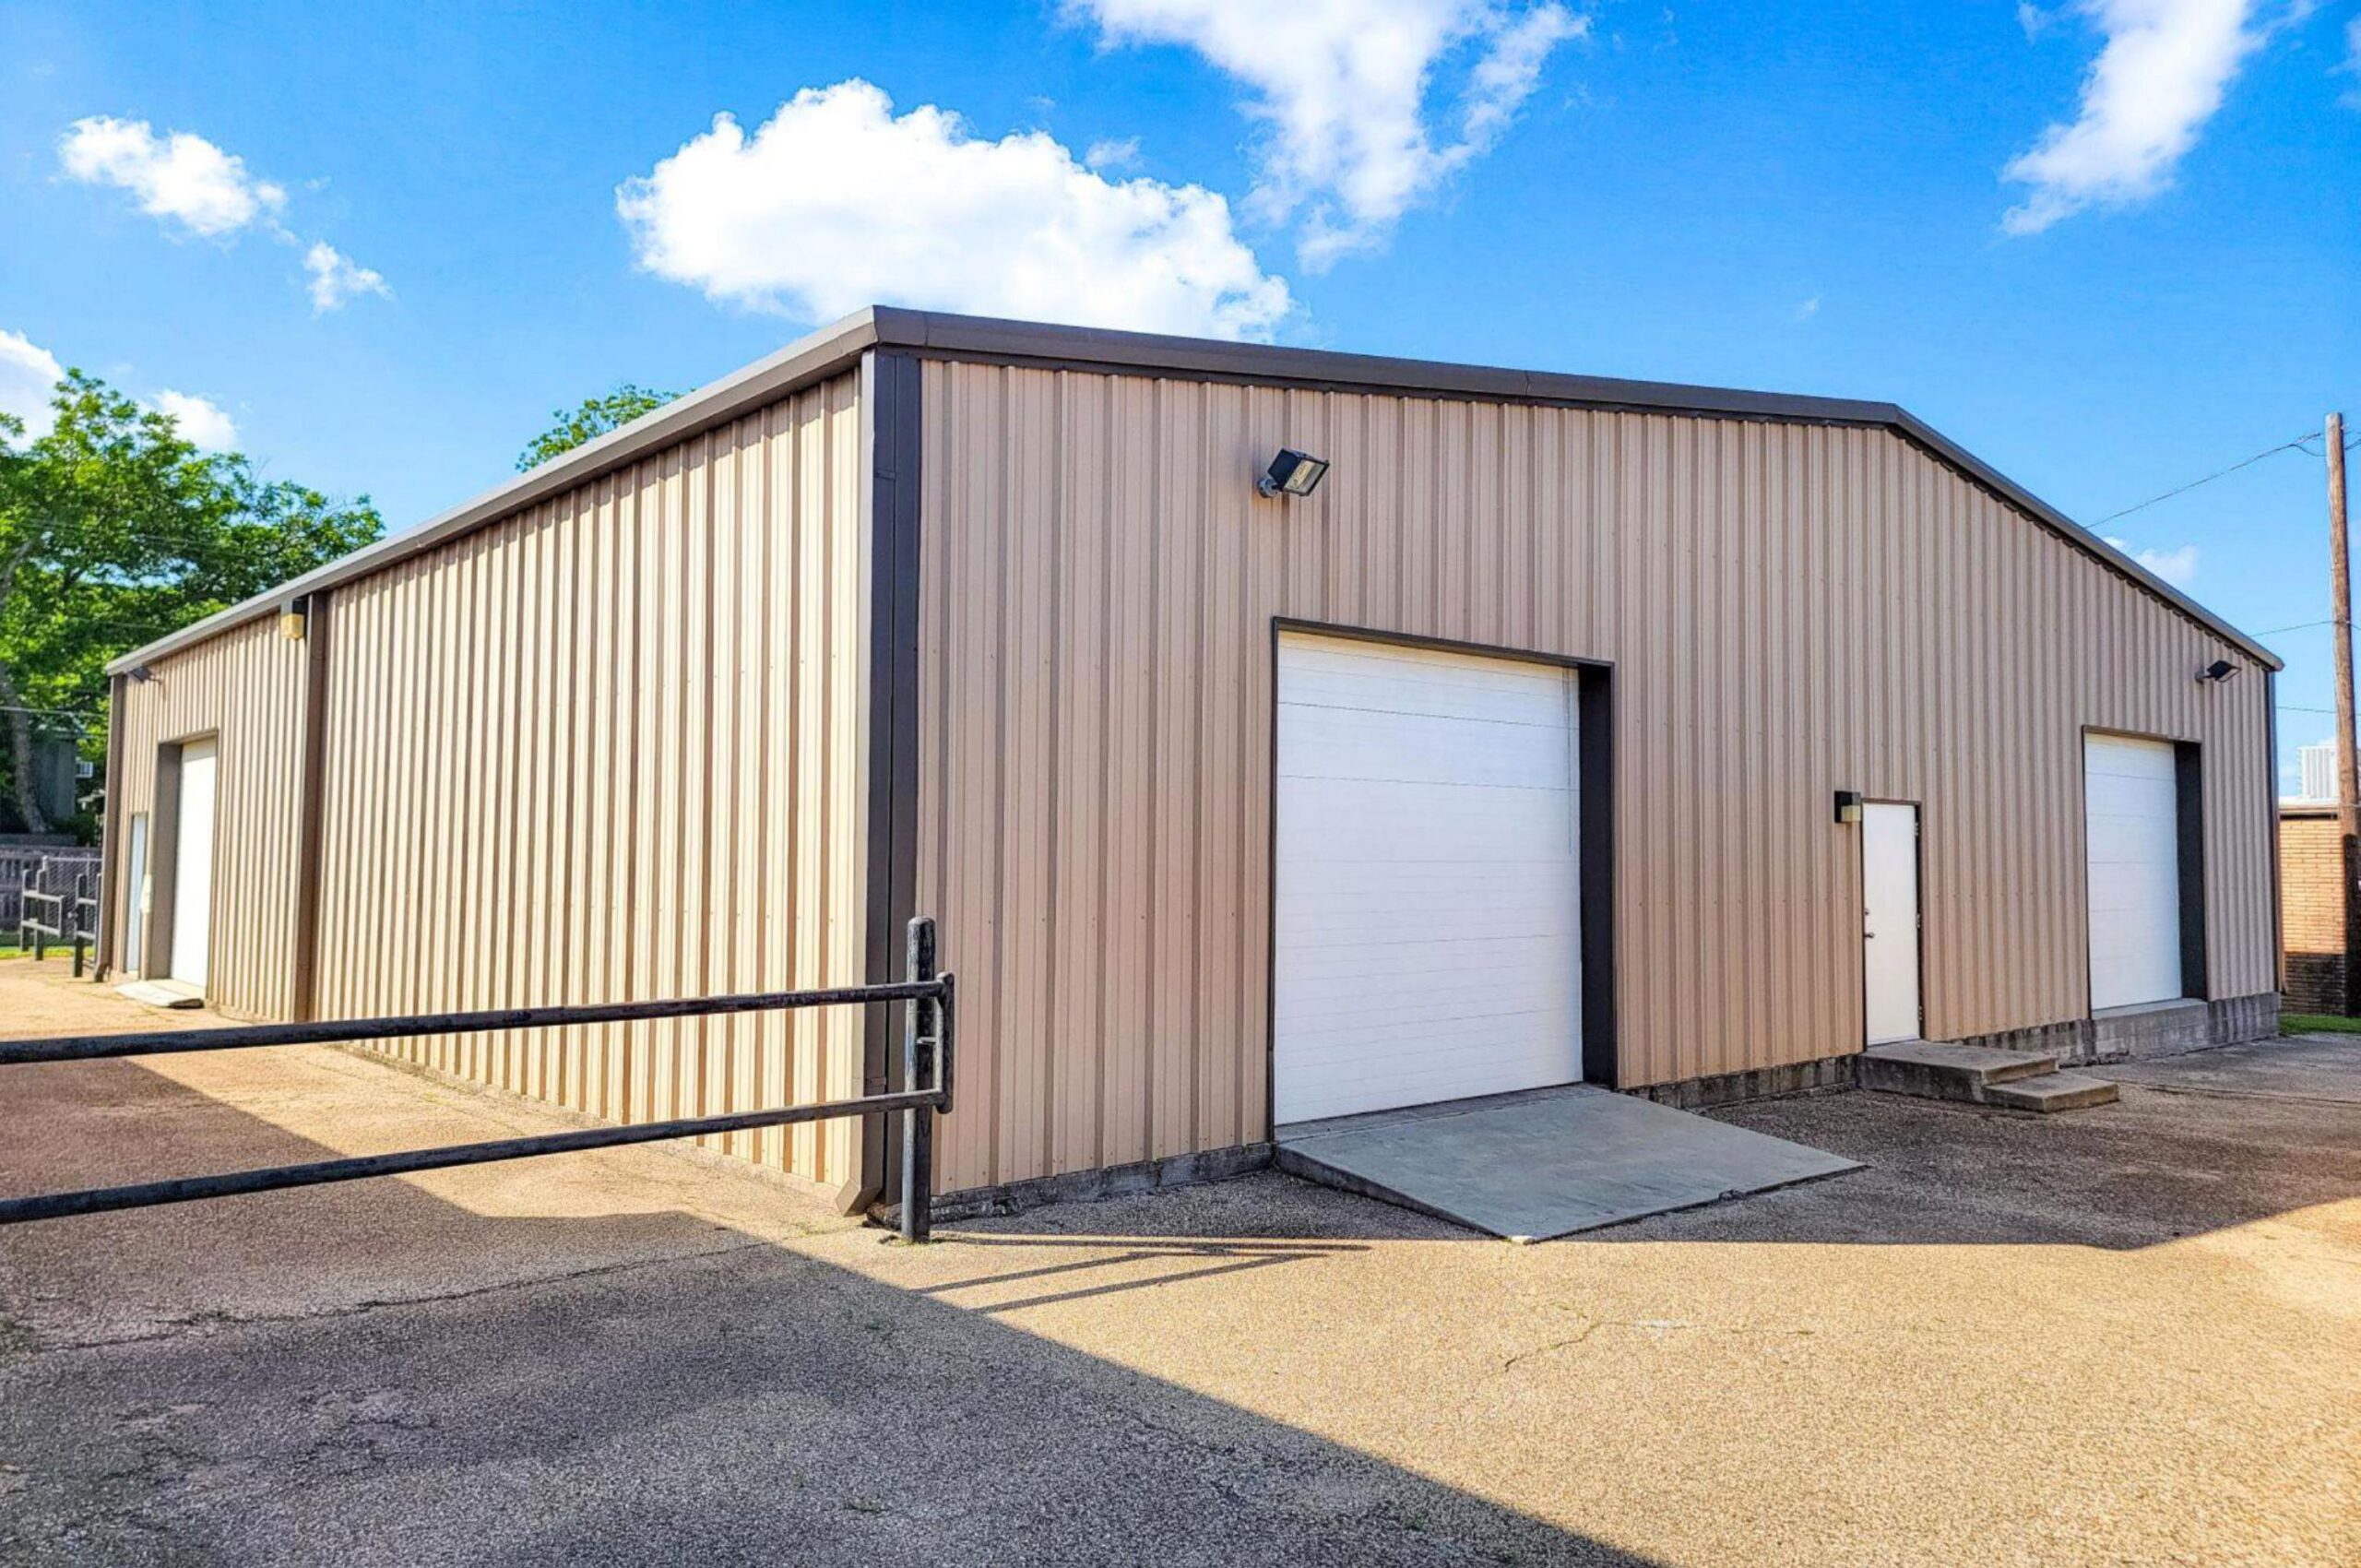 Office/Warehouse space for lease at Franklin Ave in Waco, Texas